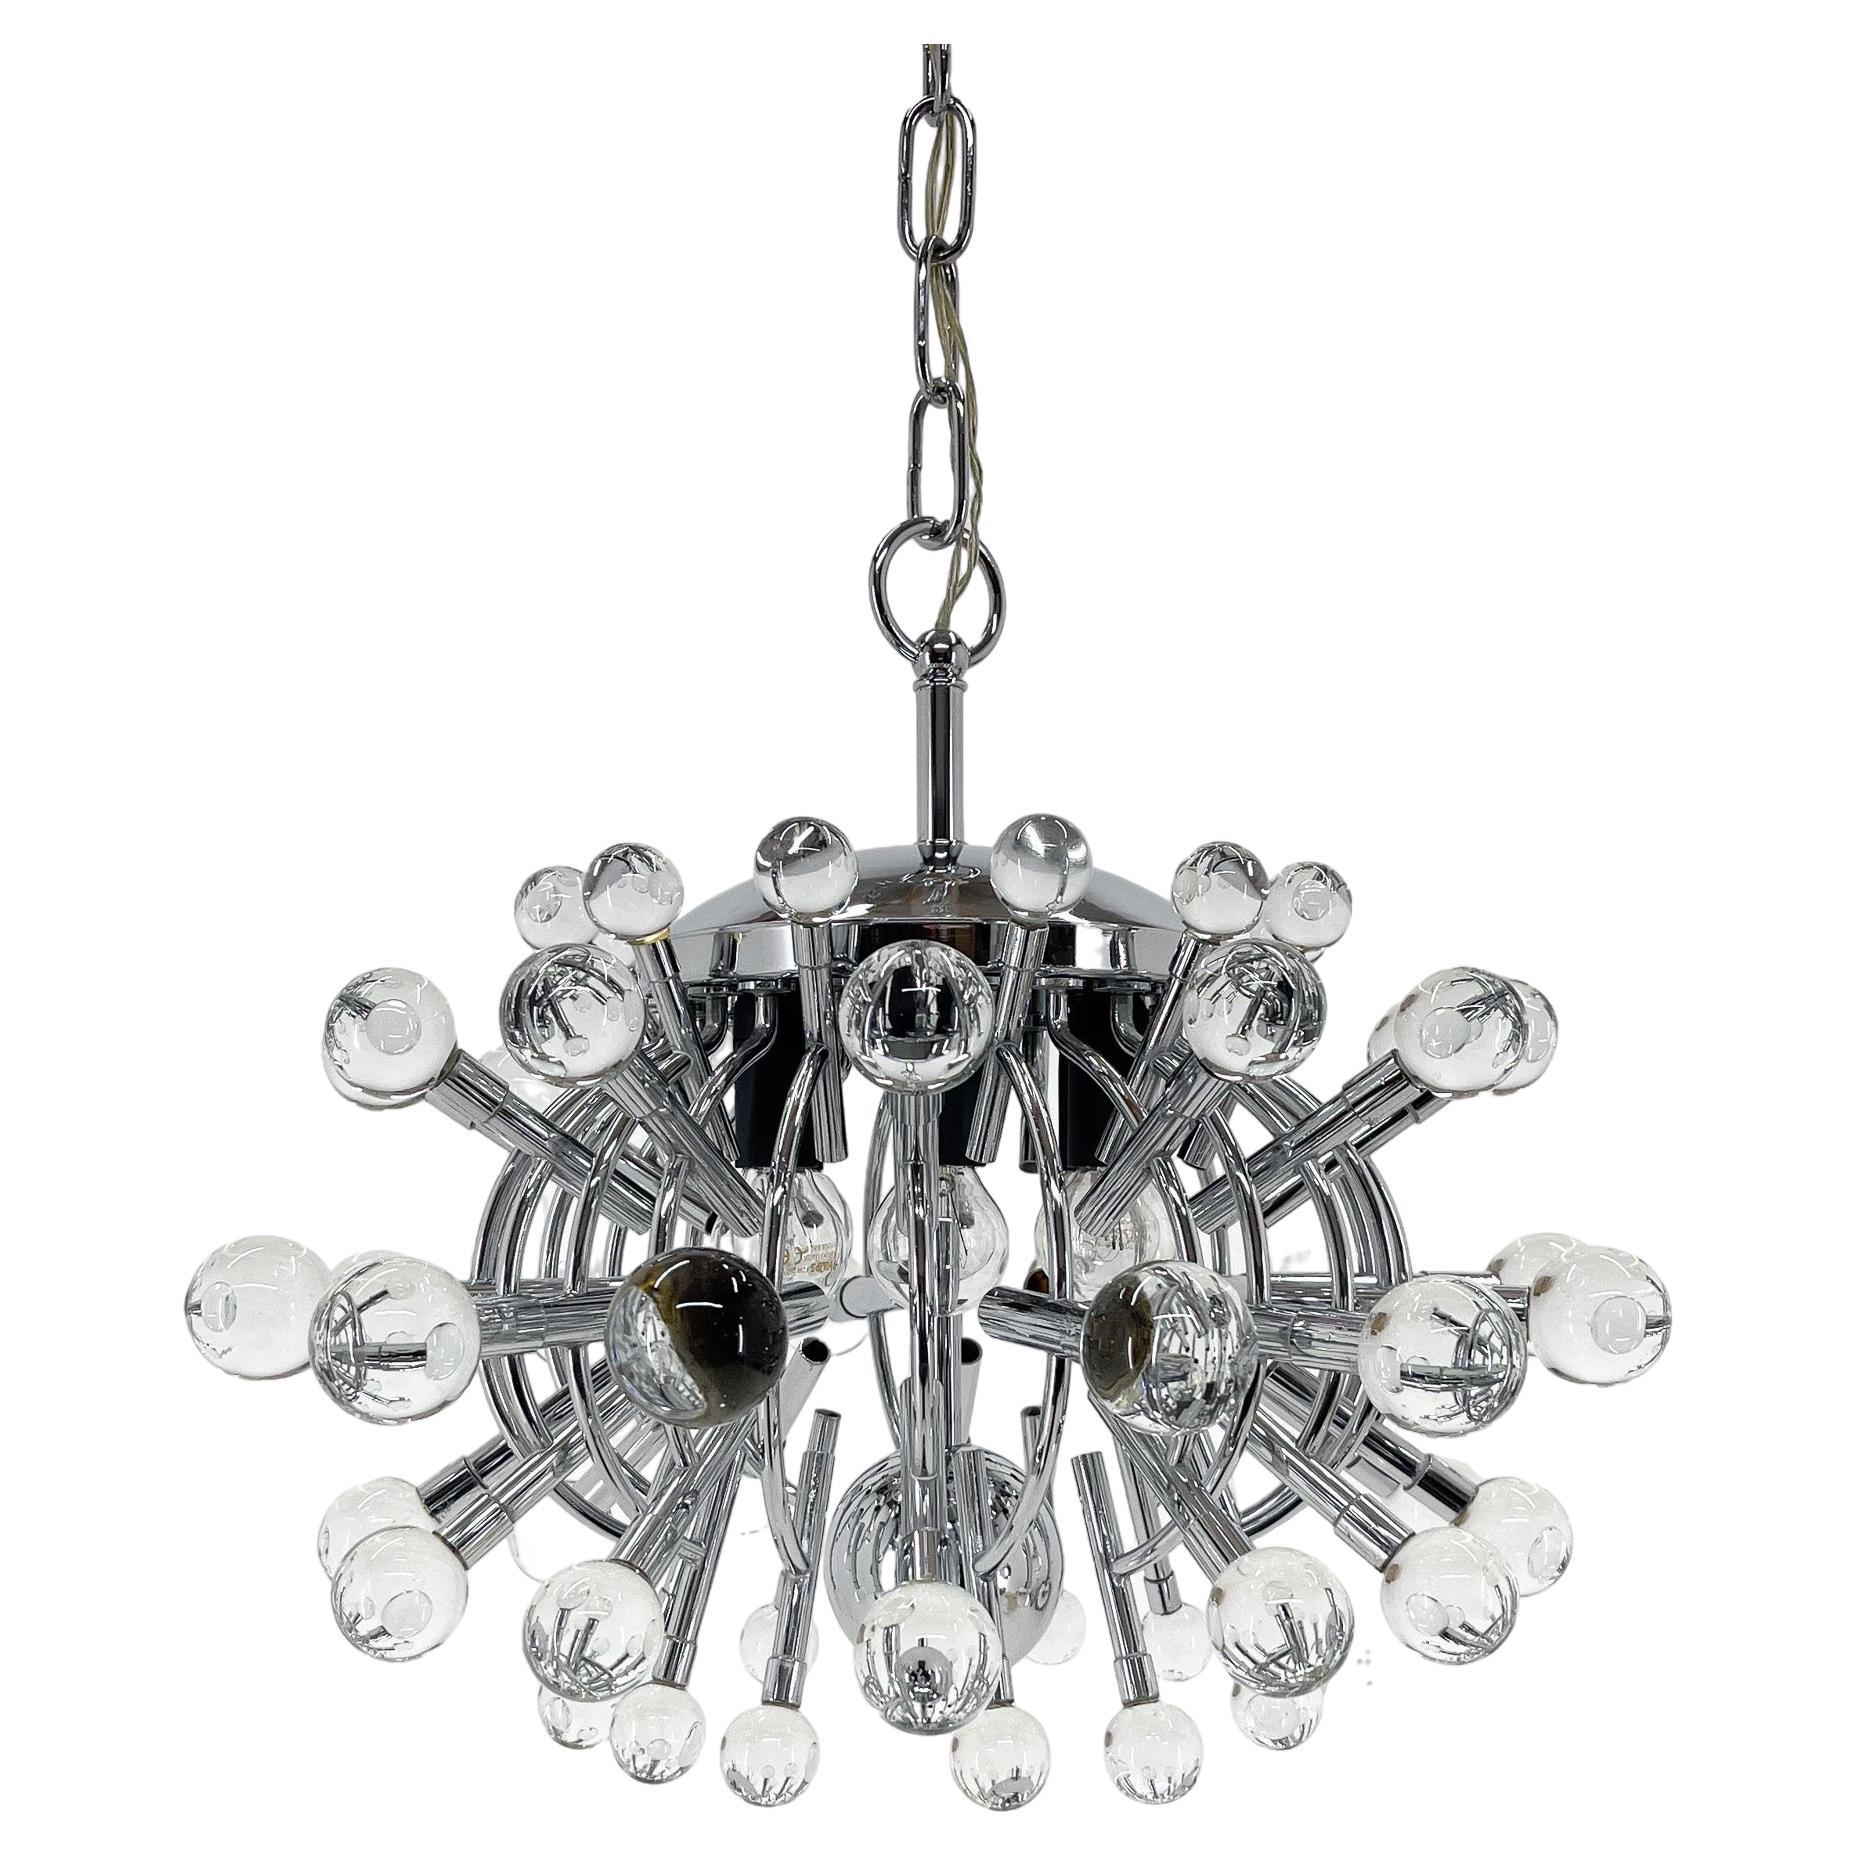 Unique Italian Space Age Chrome & Crystal Glass Chandelier, 1970s For Sale